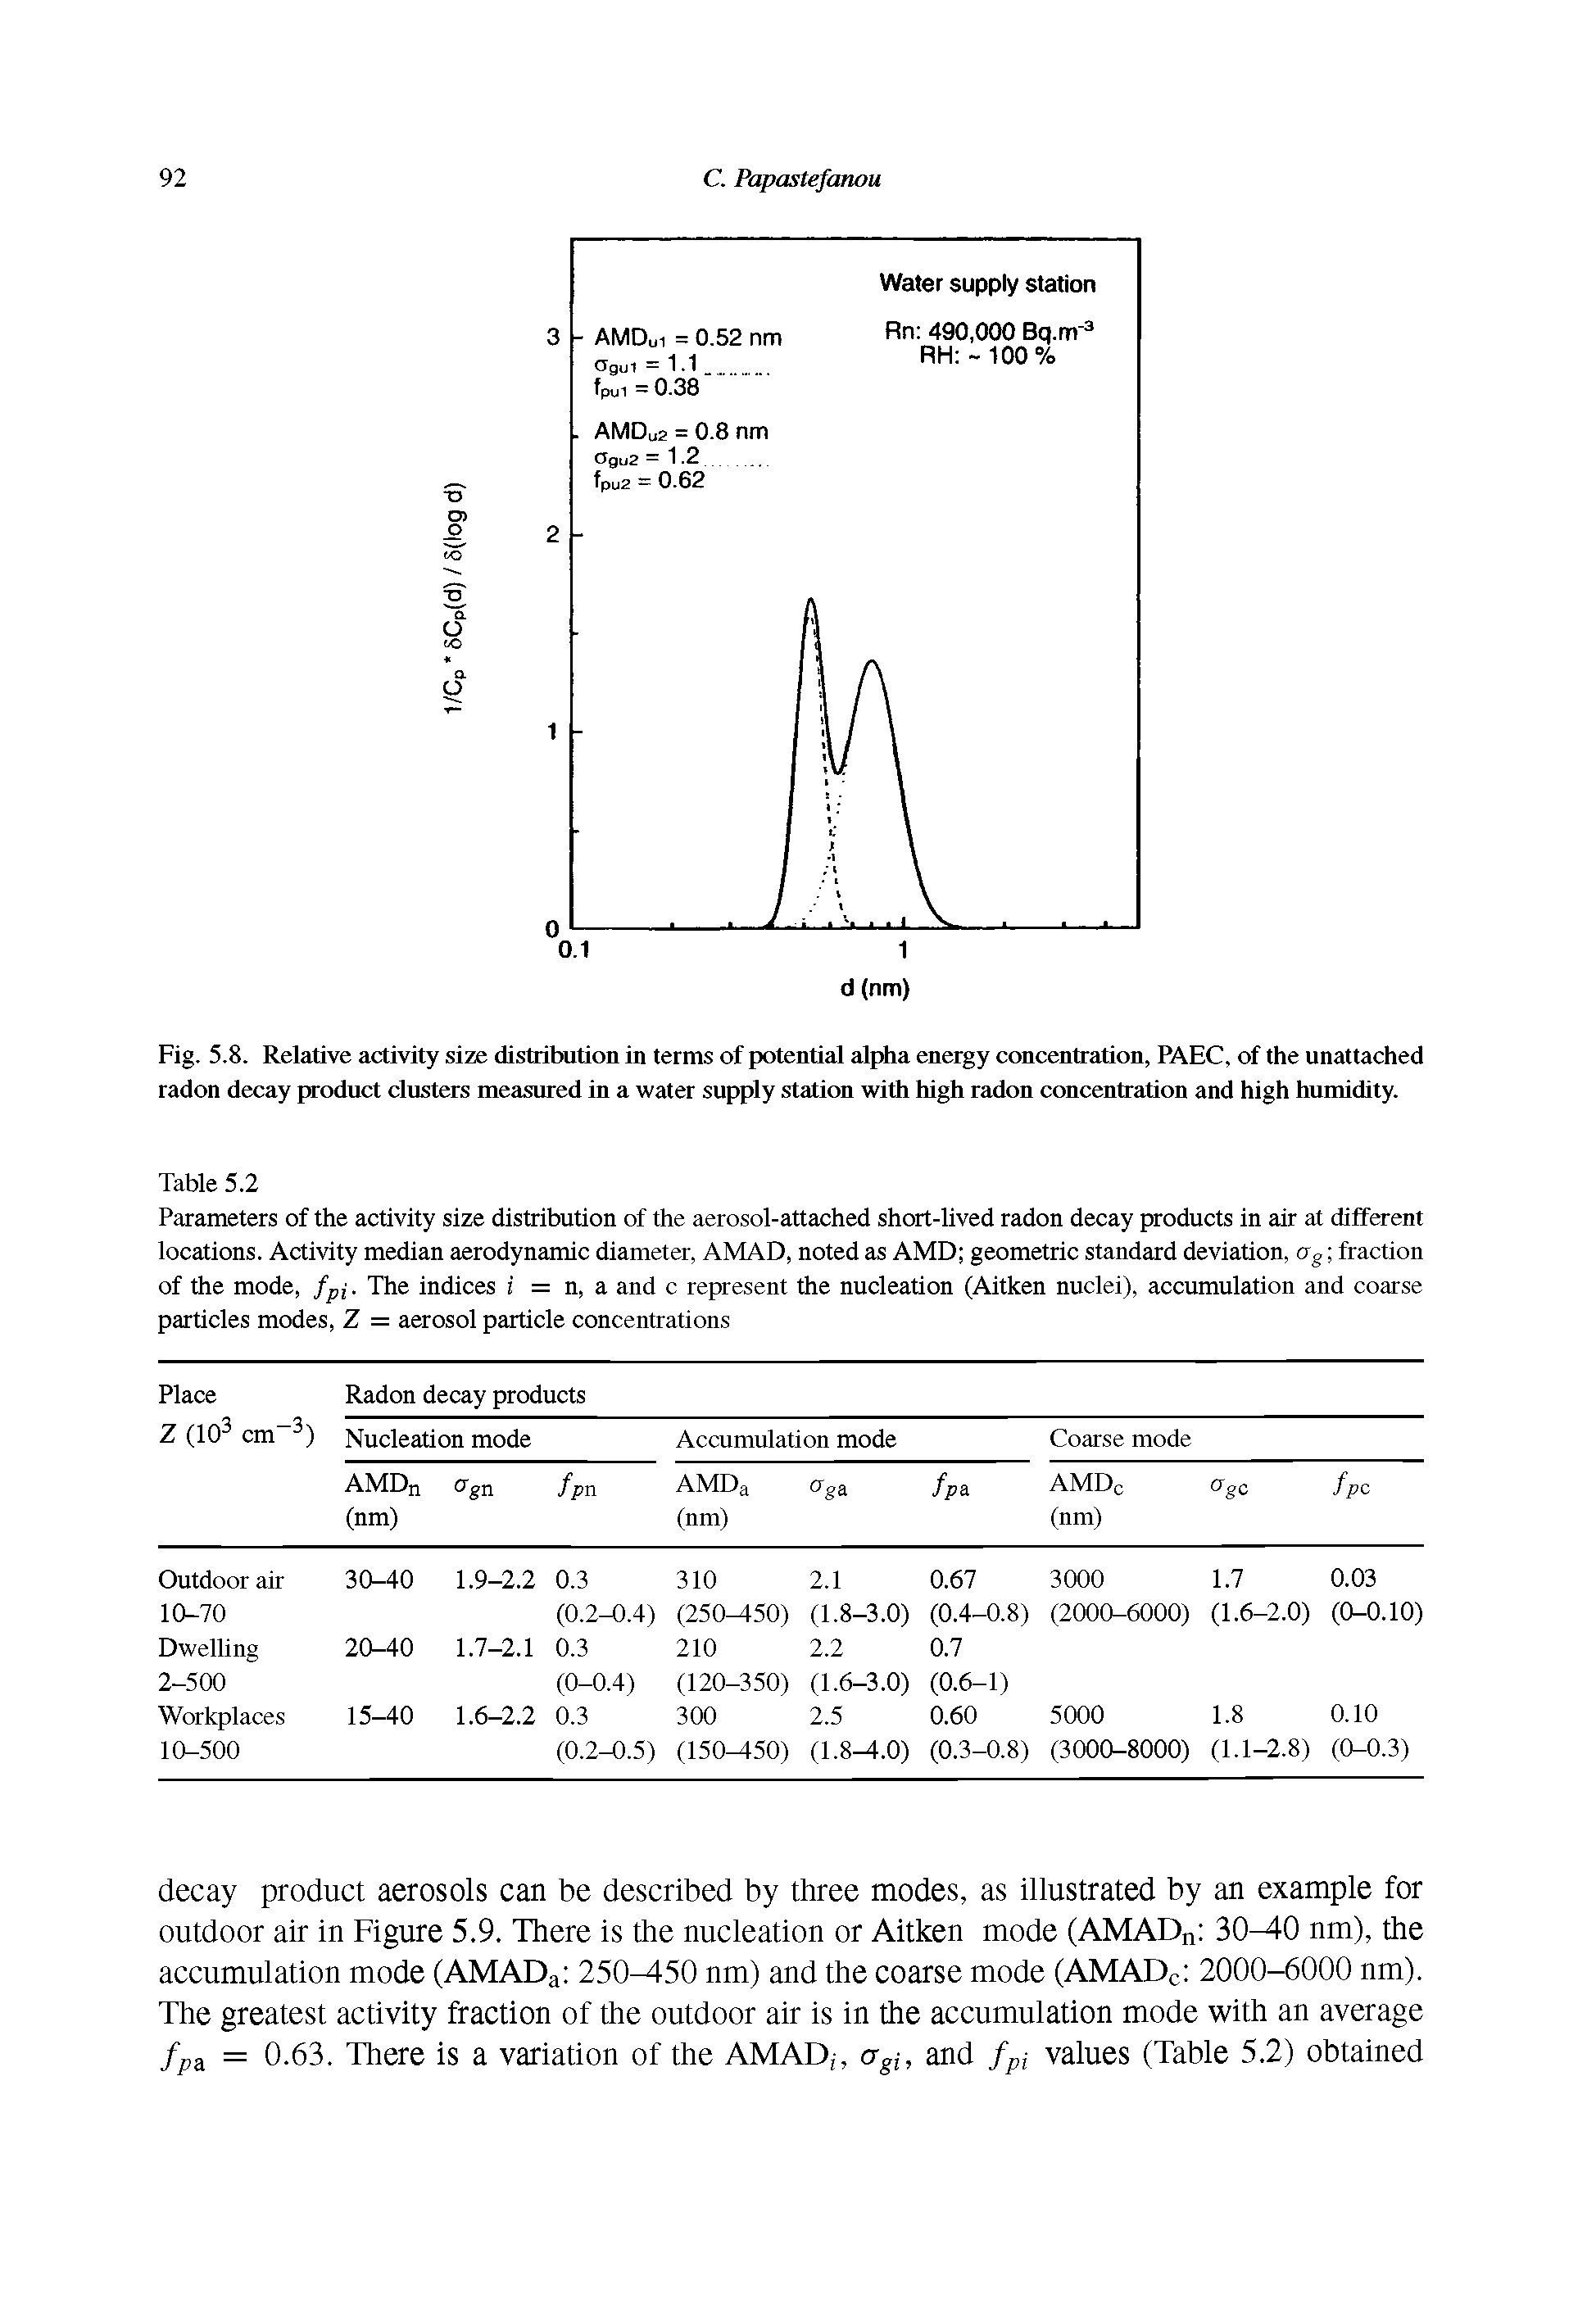 Fig. 5.8. Relative activity size distribution in terms of potential alpha energy concentration, PAEC, of the unattached radon decay product clusters measured in a water supply station with high radon concentration and high humidity.